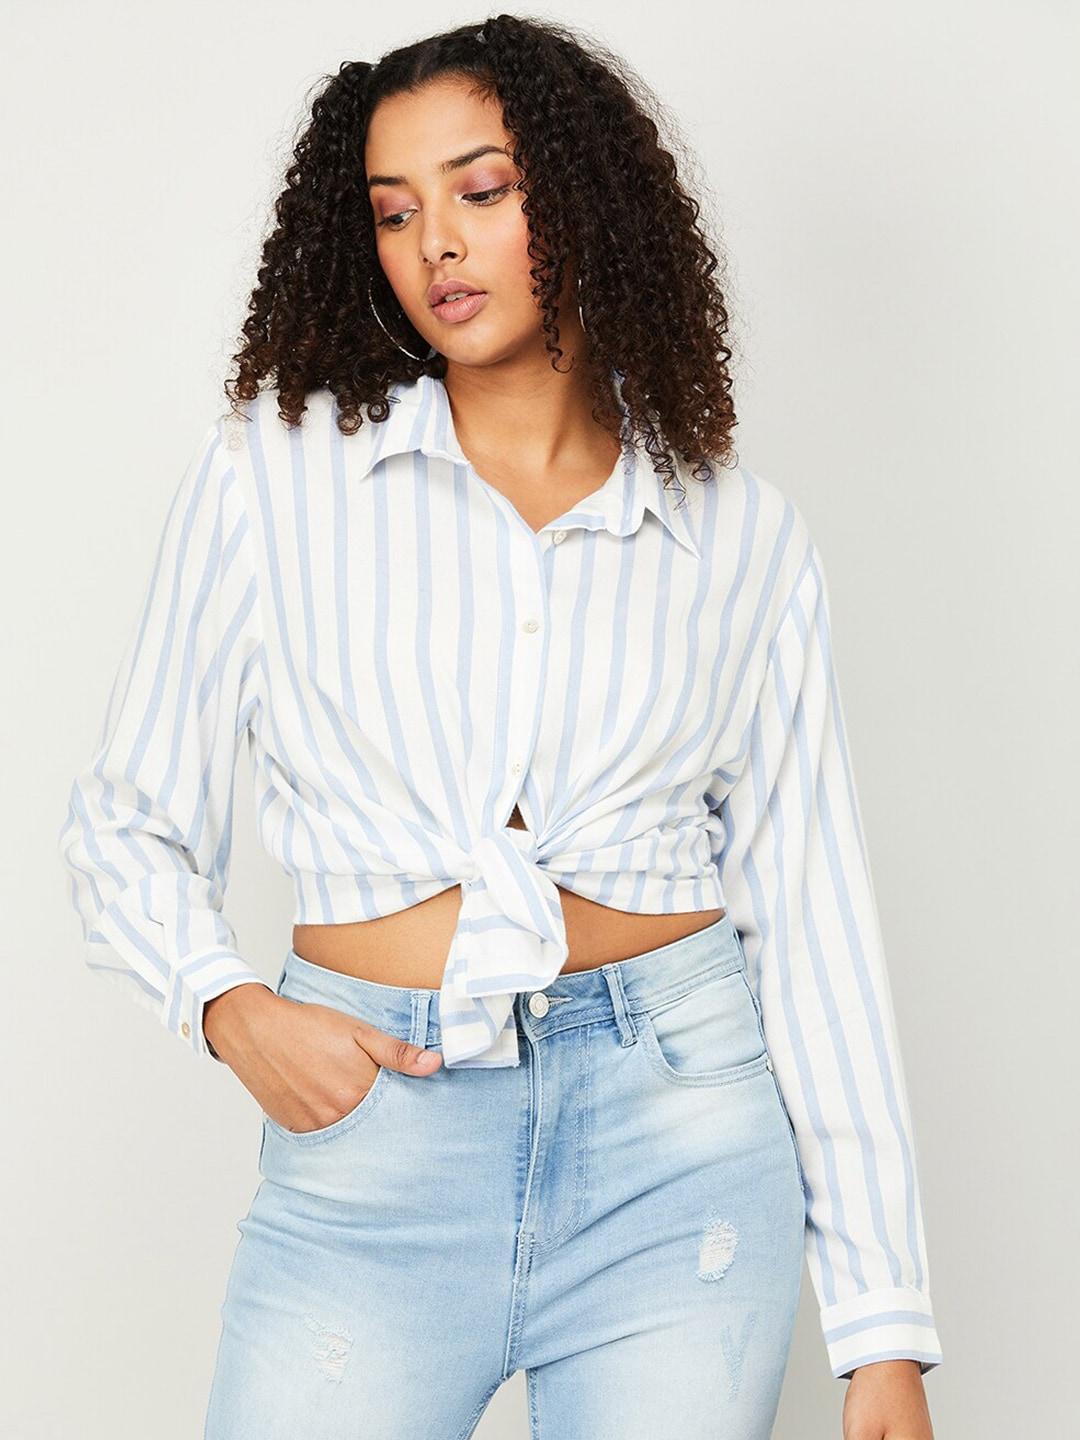 ginger by lifestyle vertical striped shirt style crop top